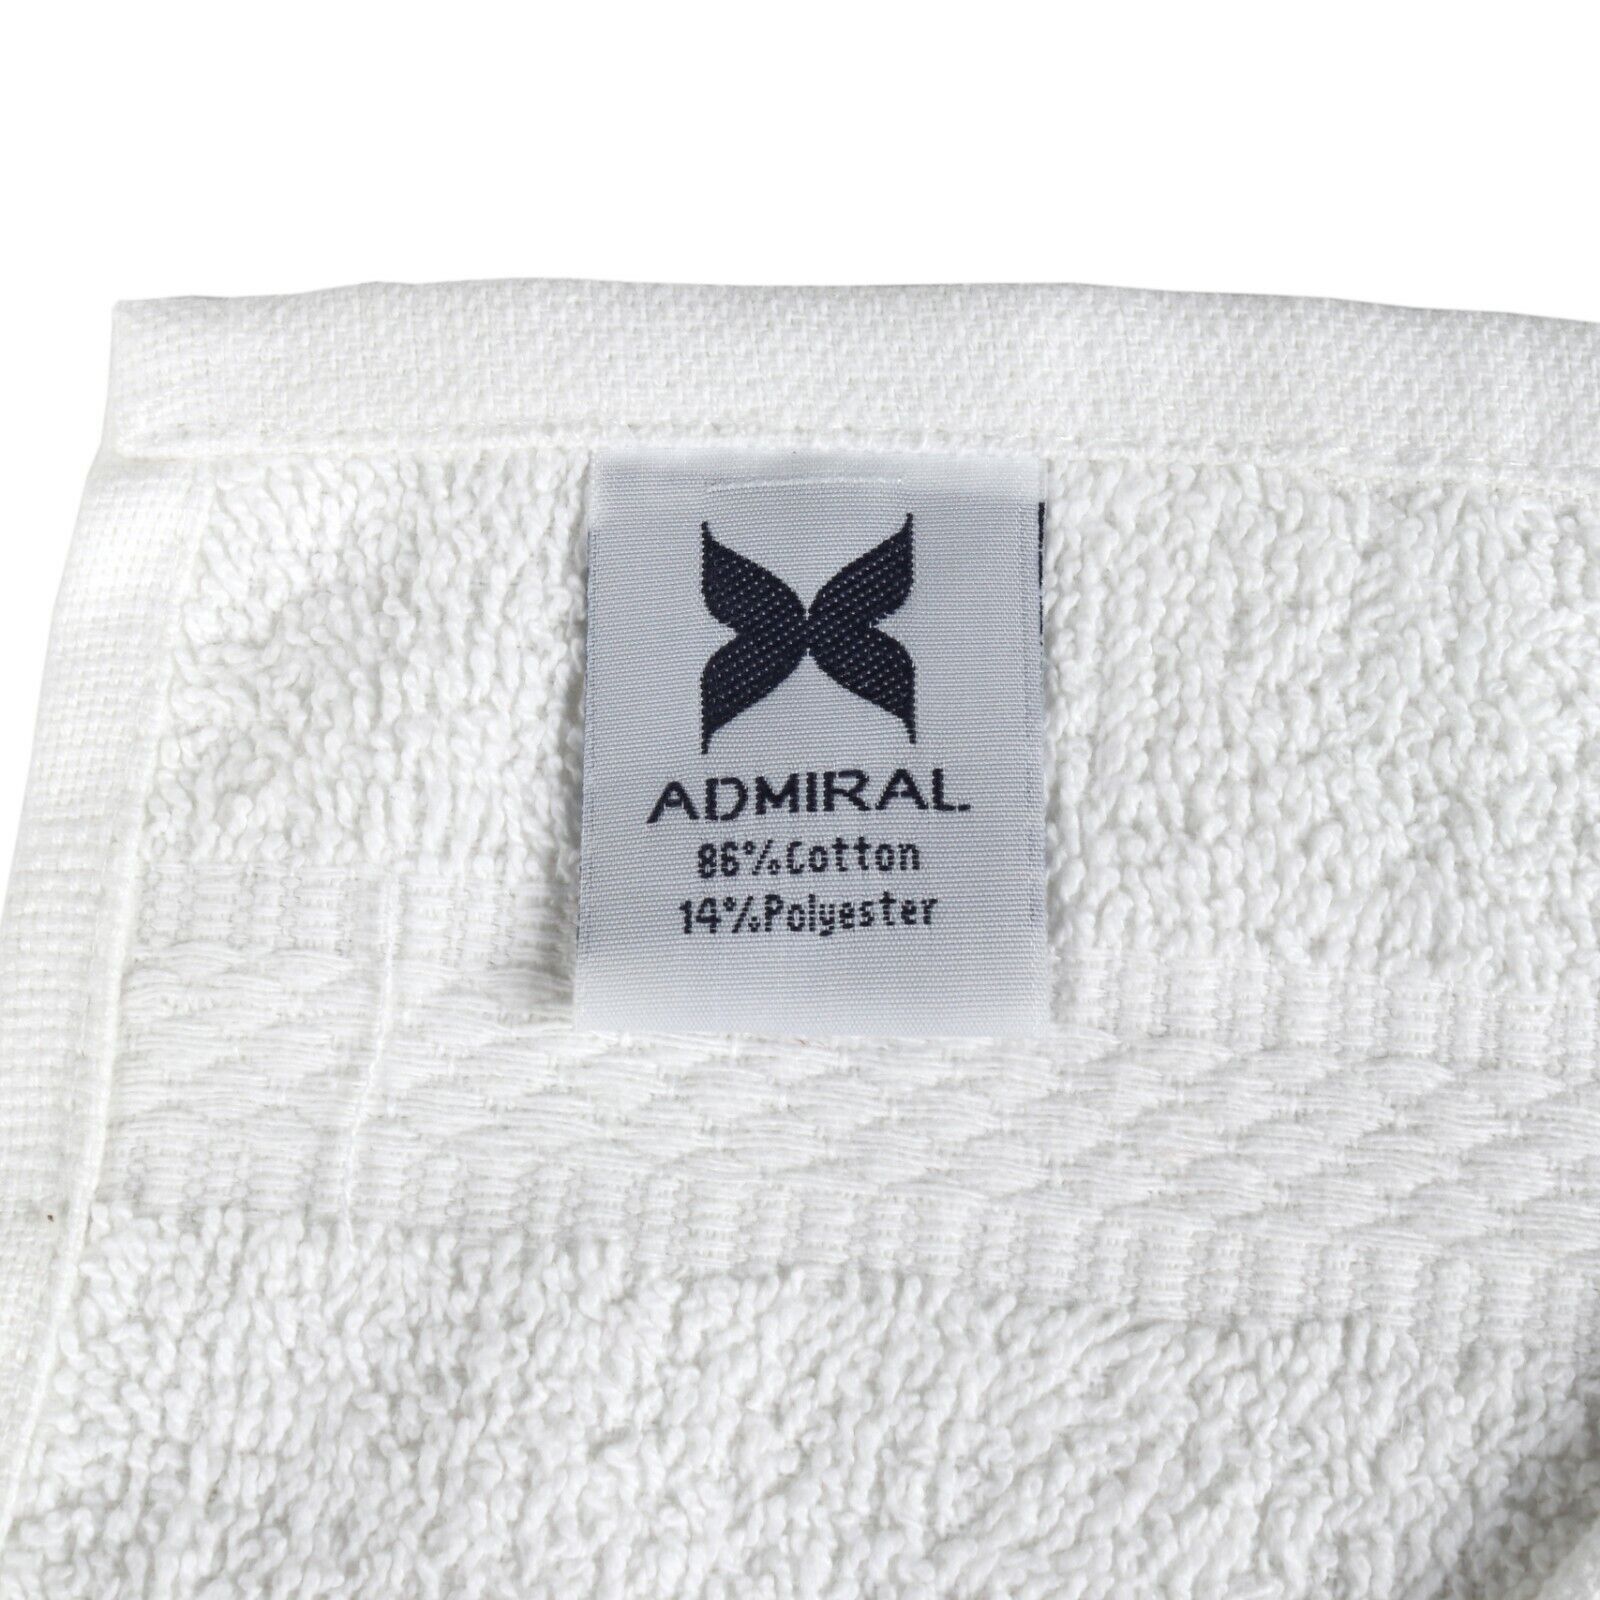 12 Pack of Admiral Washcloths - White - 13x13 - Bulk Bathroom Cotton Towels Arkwright Does Not Apply - фотография #4